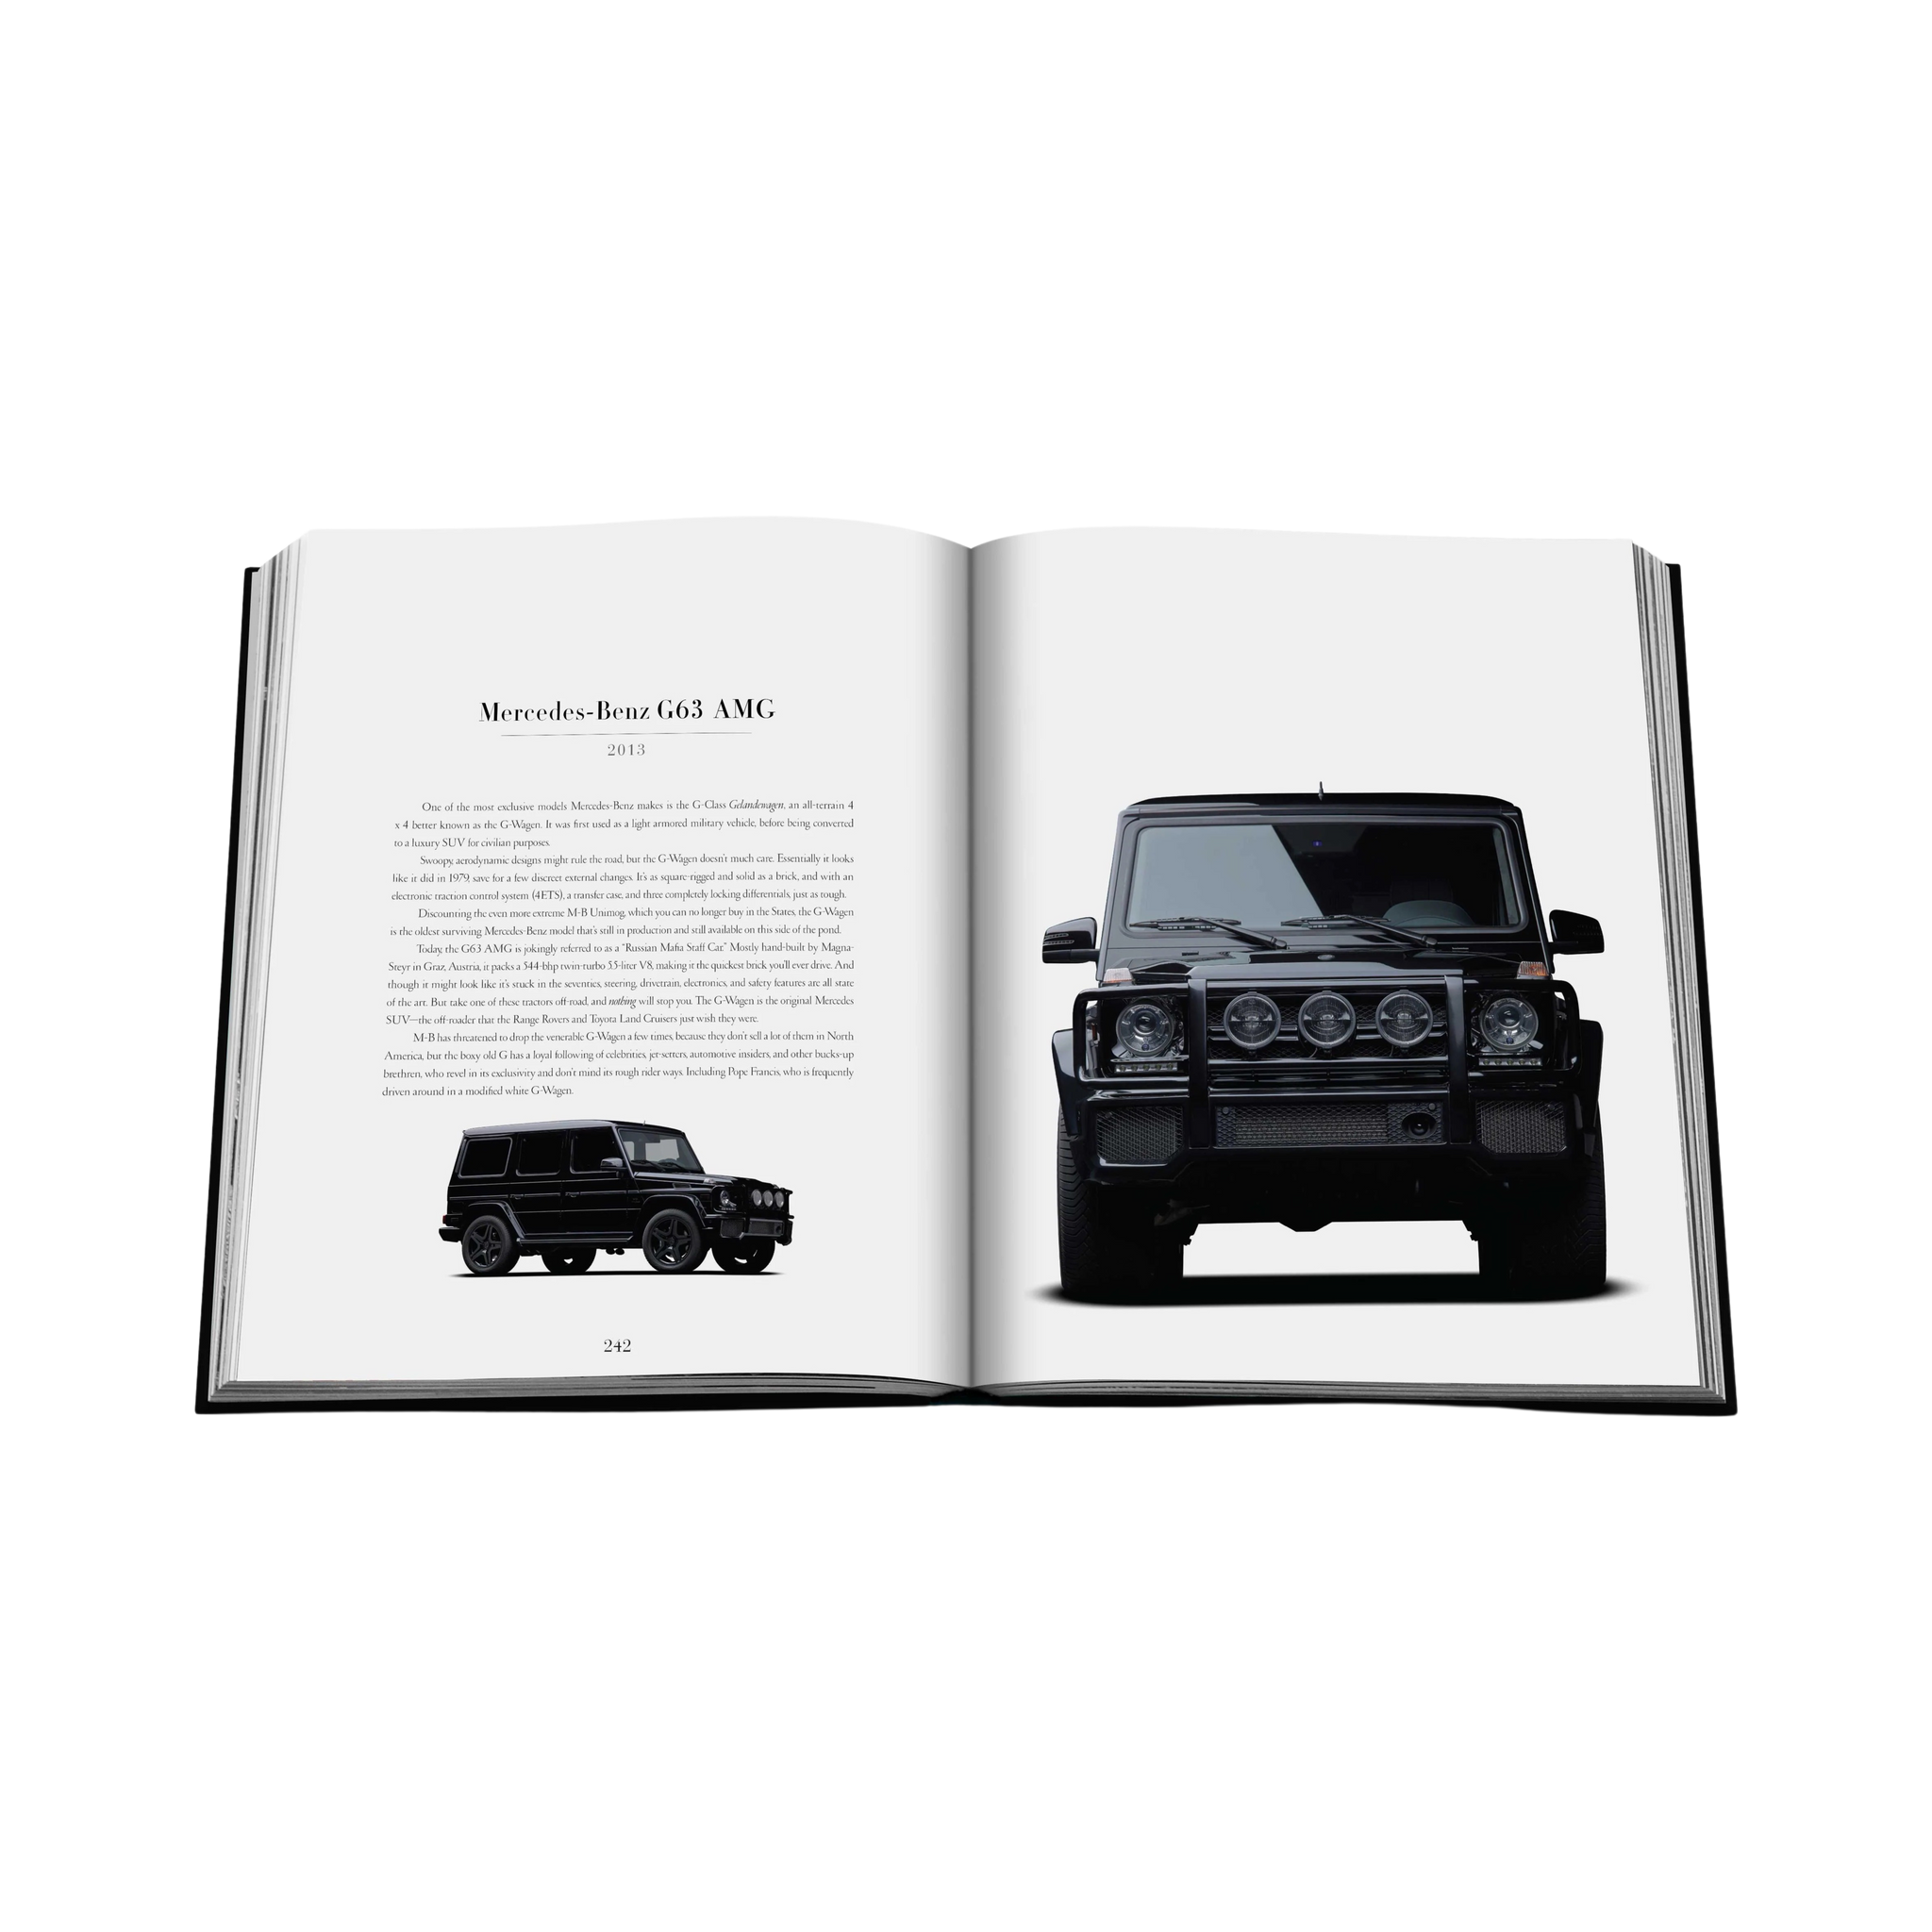 88462 Assouline Iconic Art,Design,Advertising Automobile Coffee table book